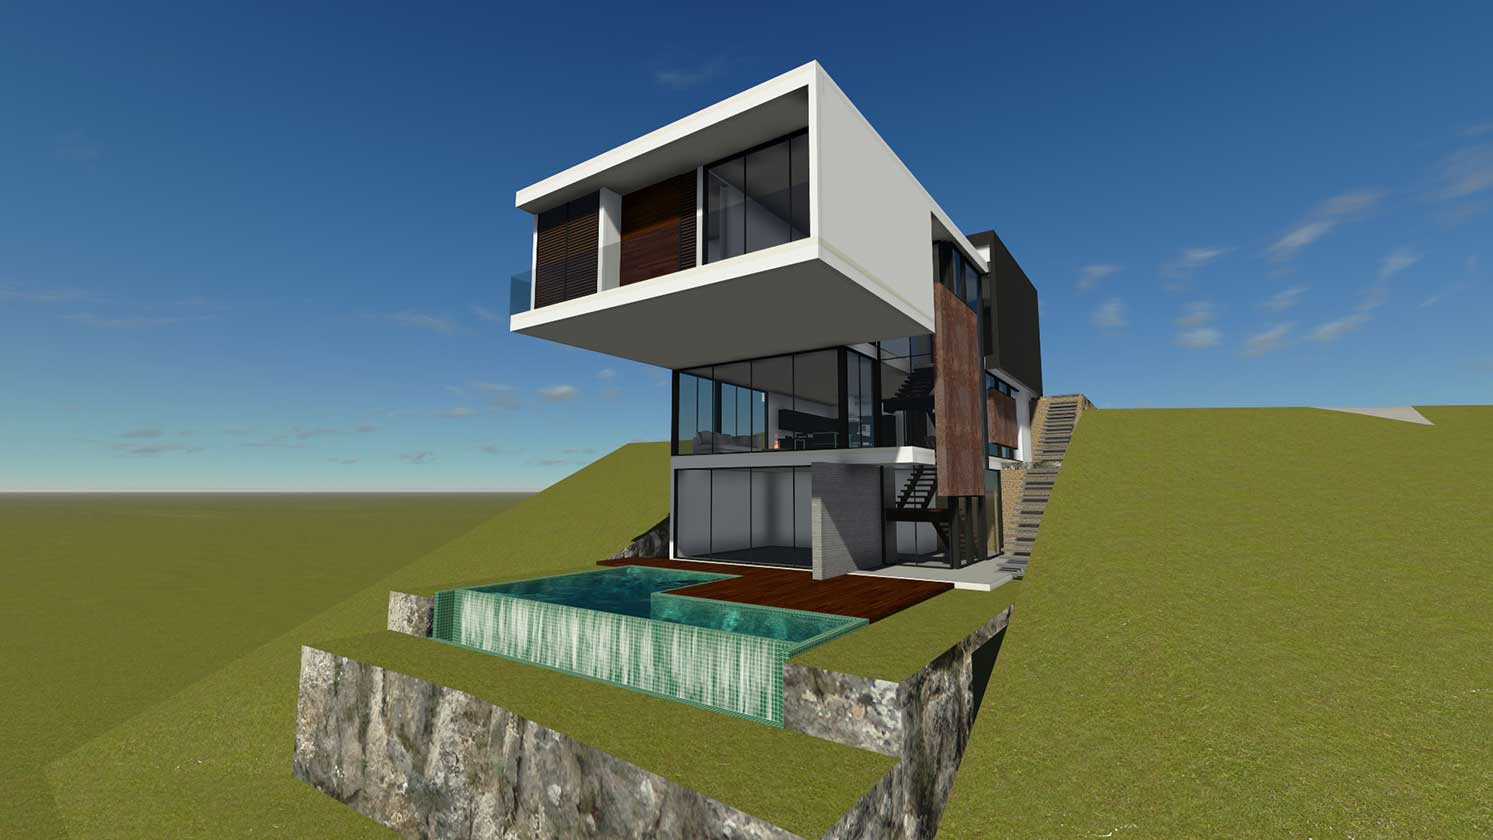 Residential house, Brazil - steel, concrete structure